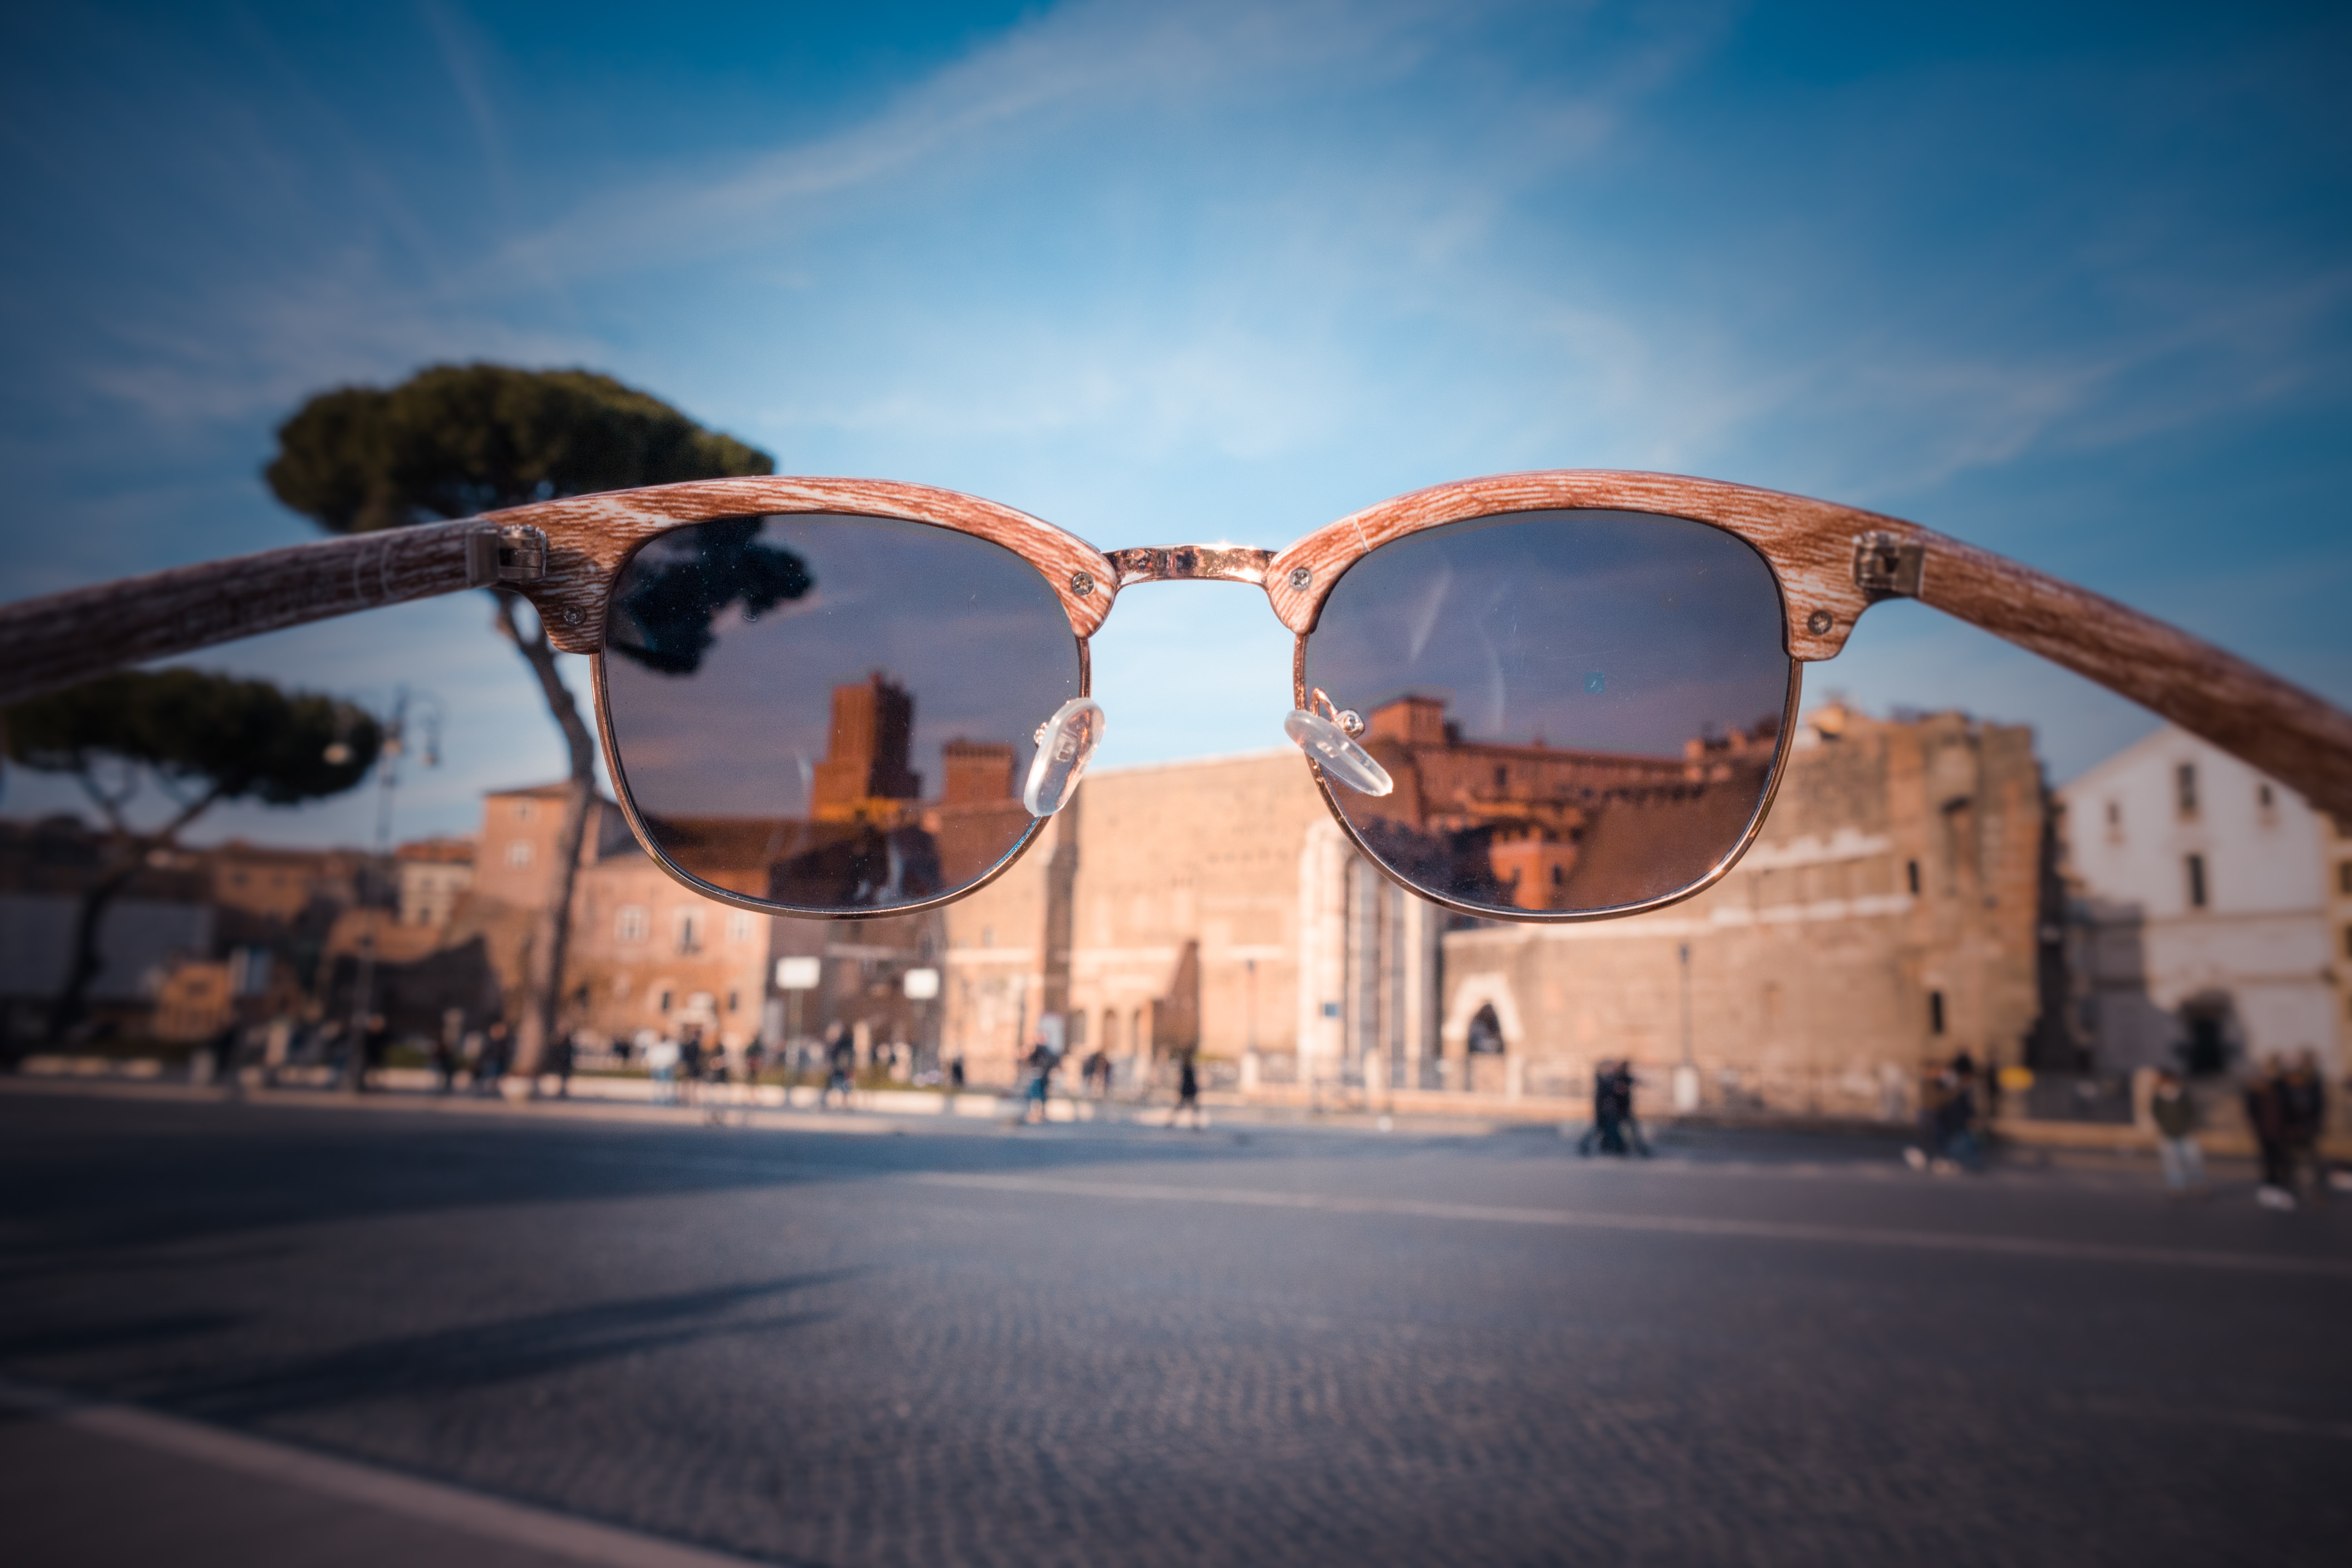 Sunglasses View Brown Building, Architecture, People, Trees, Town, HQ Photo